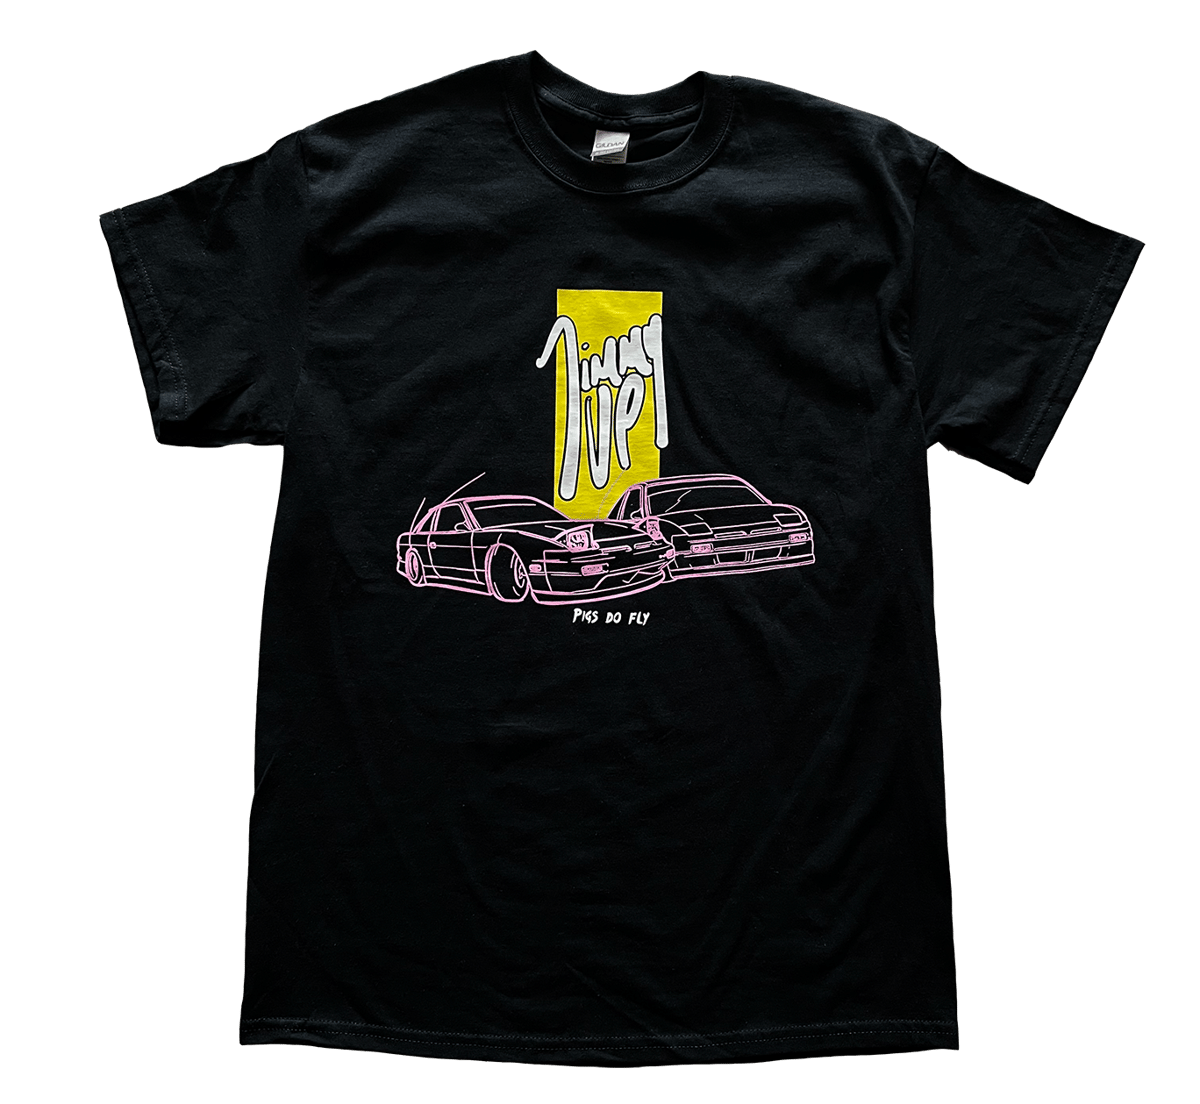 Pigs Do Fly S13 Pignose Tee | Jimmy Up